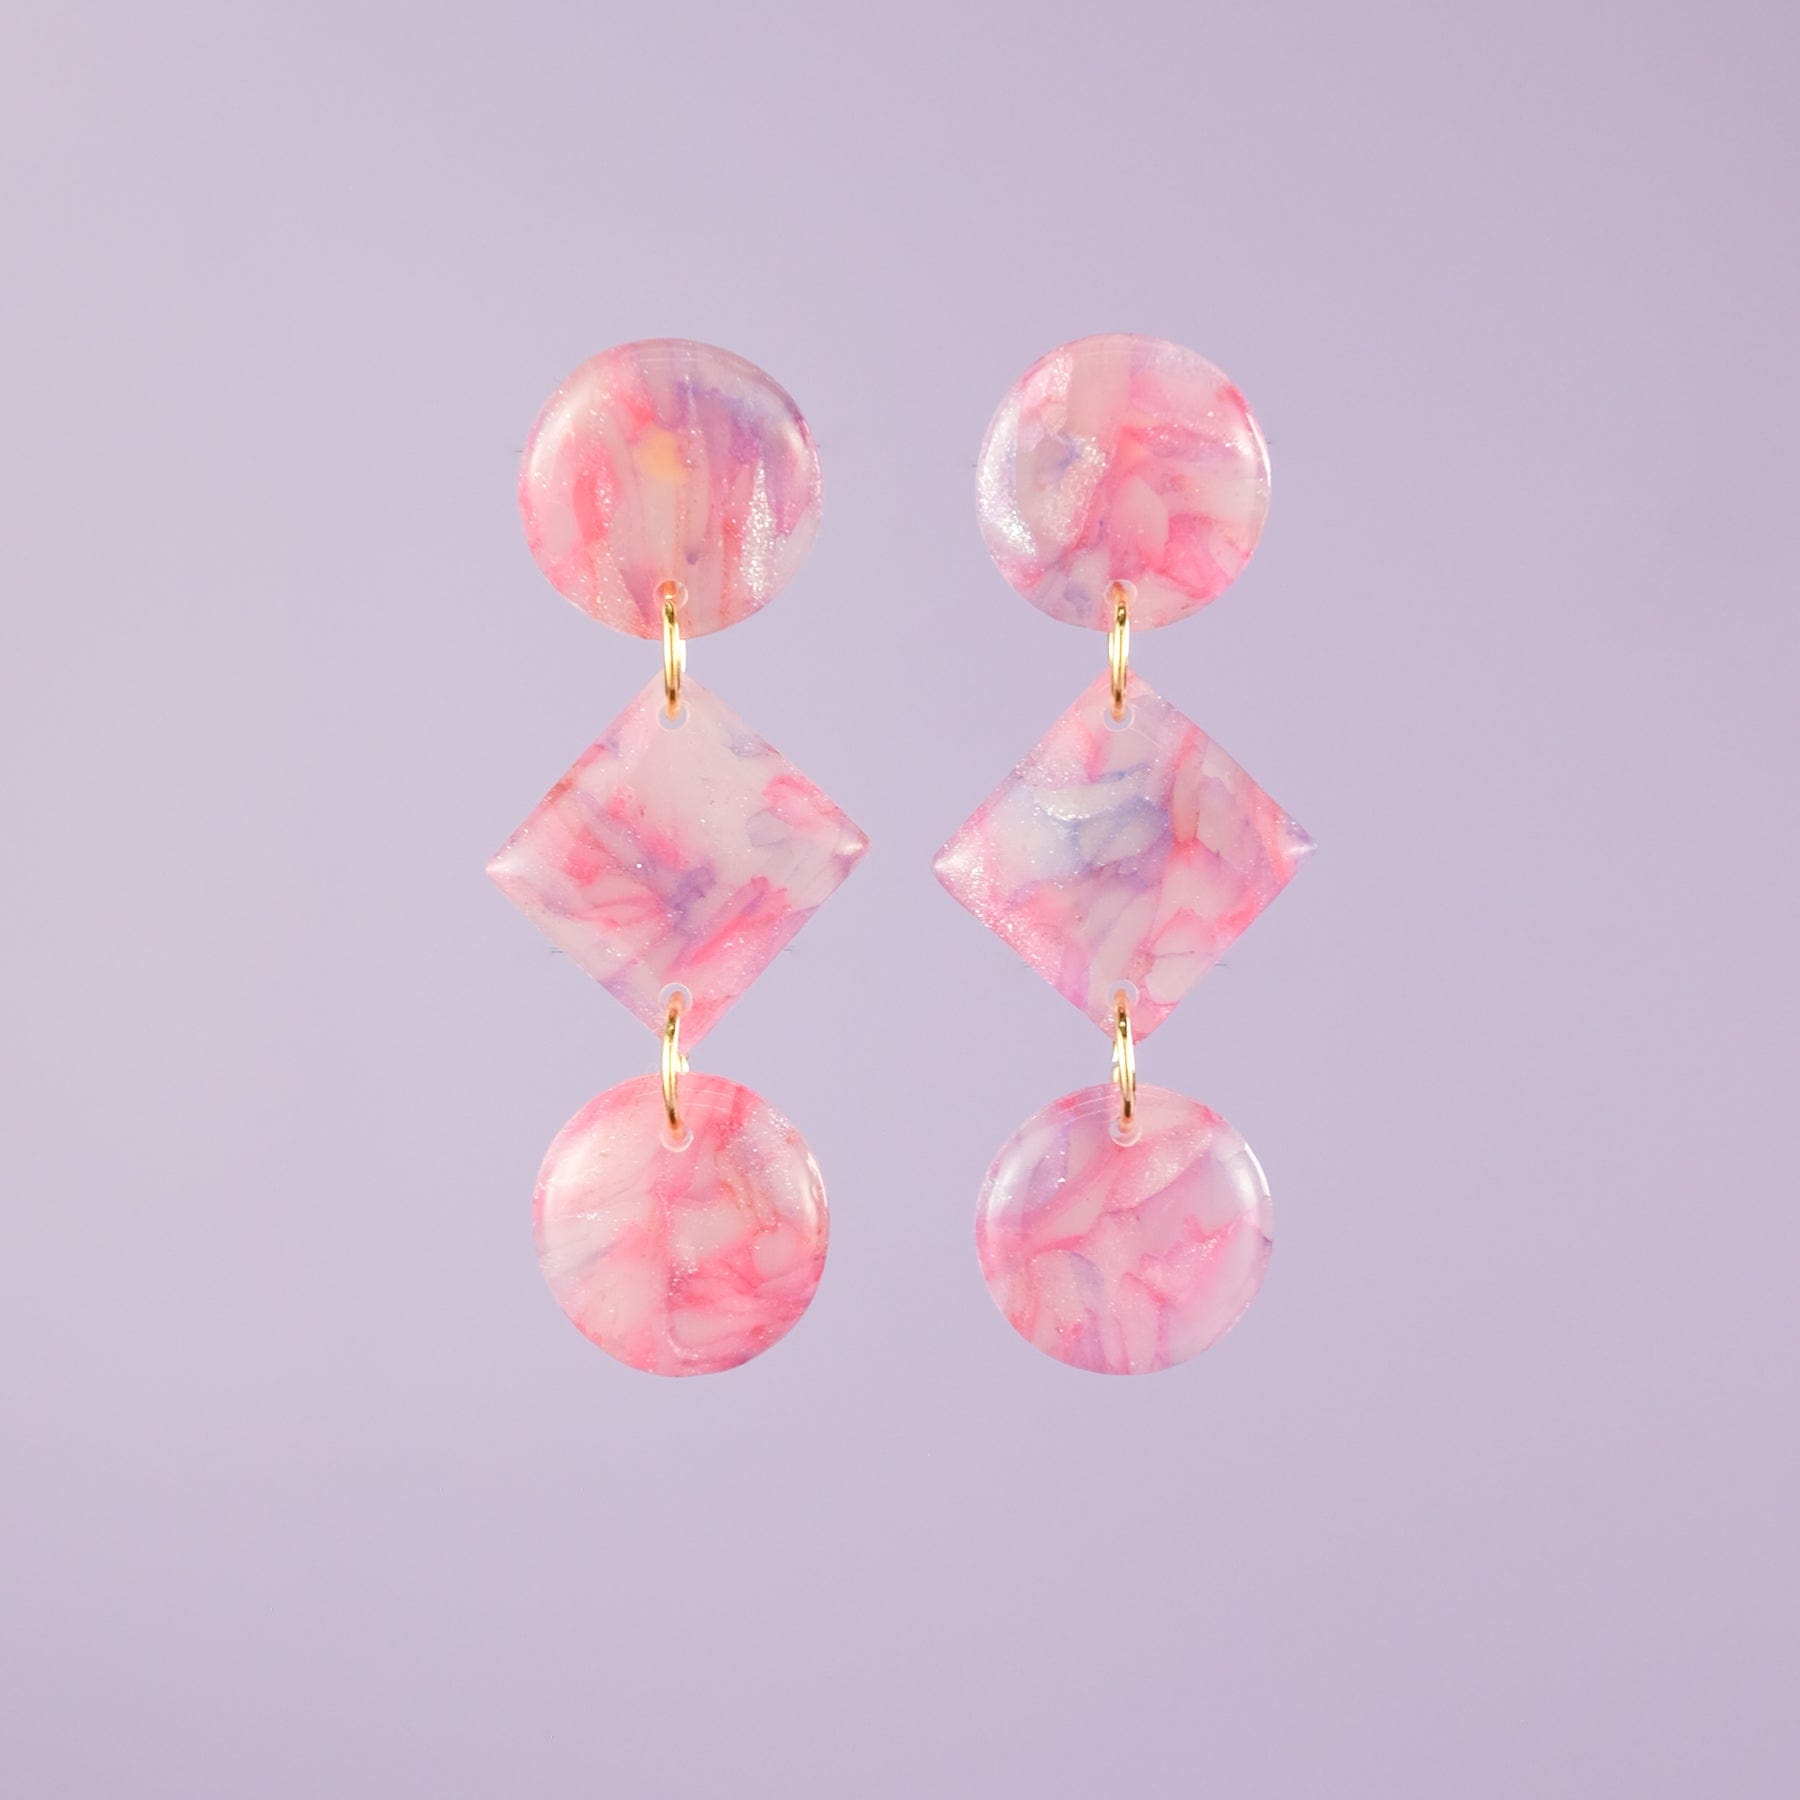 Marbled geometric dangly earrings lightweight pink purple and translucent